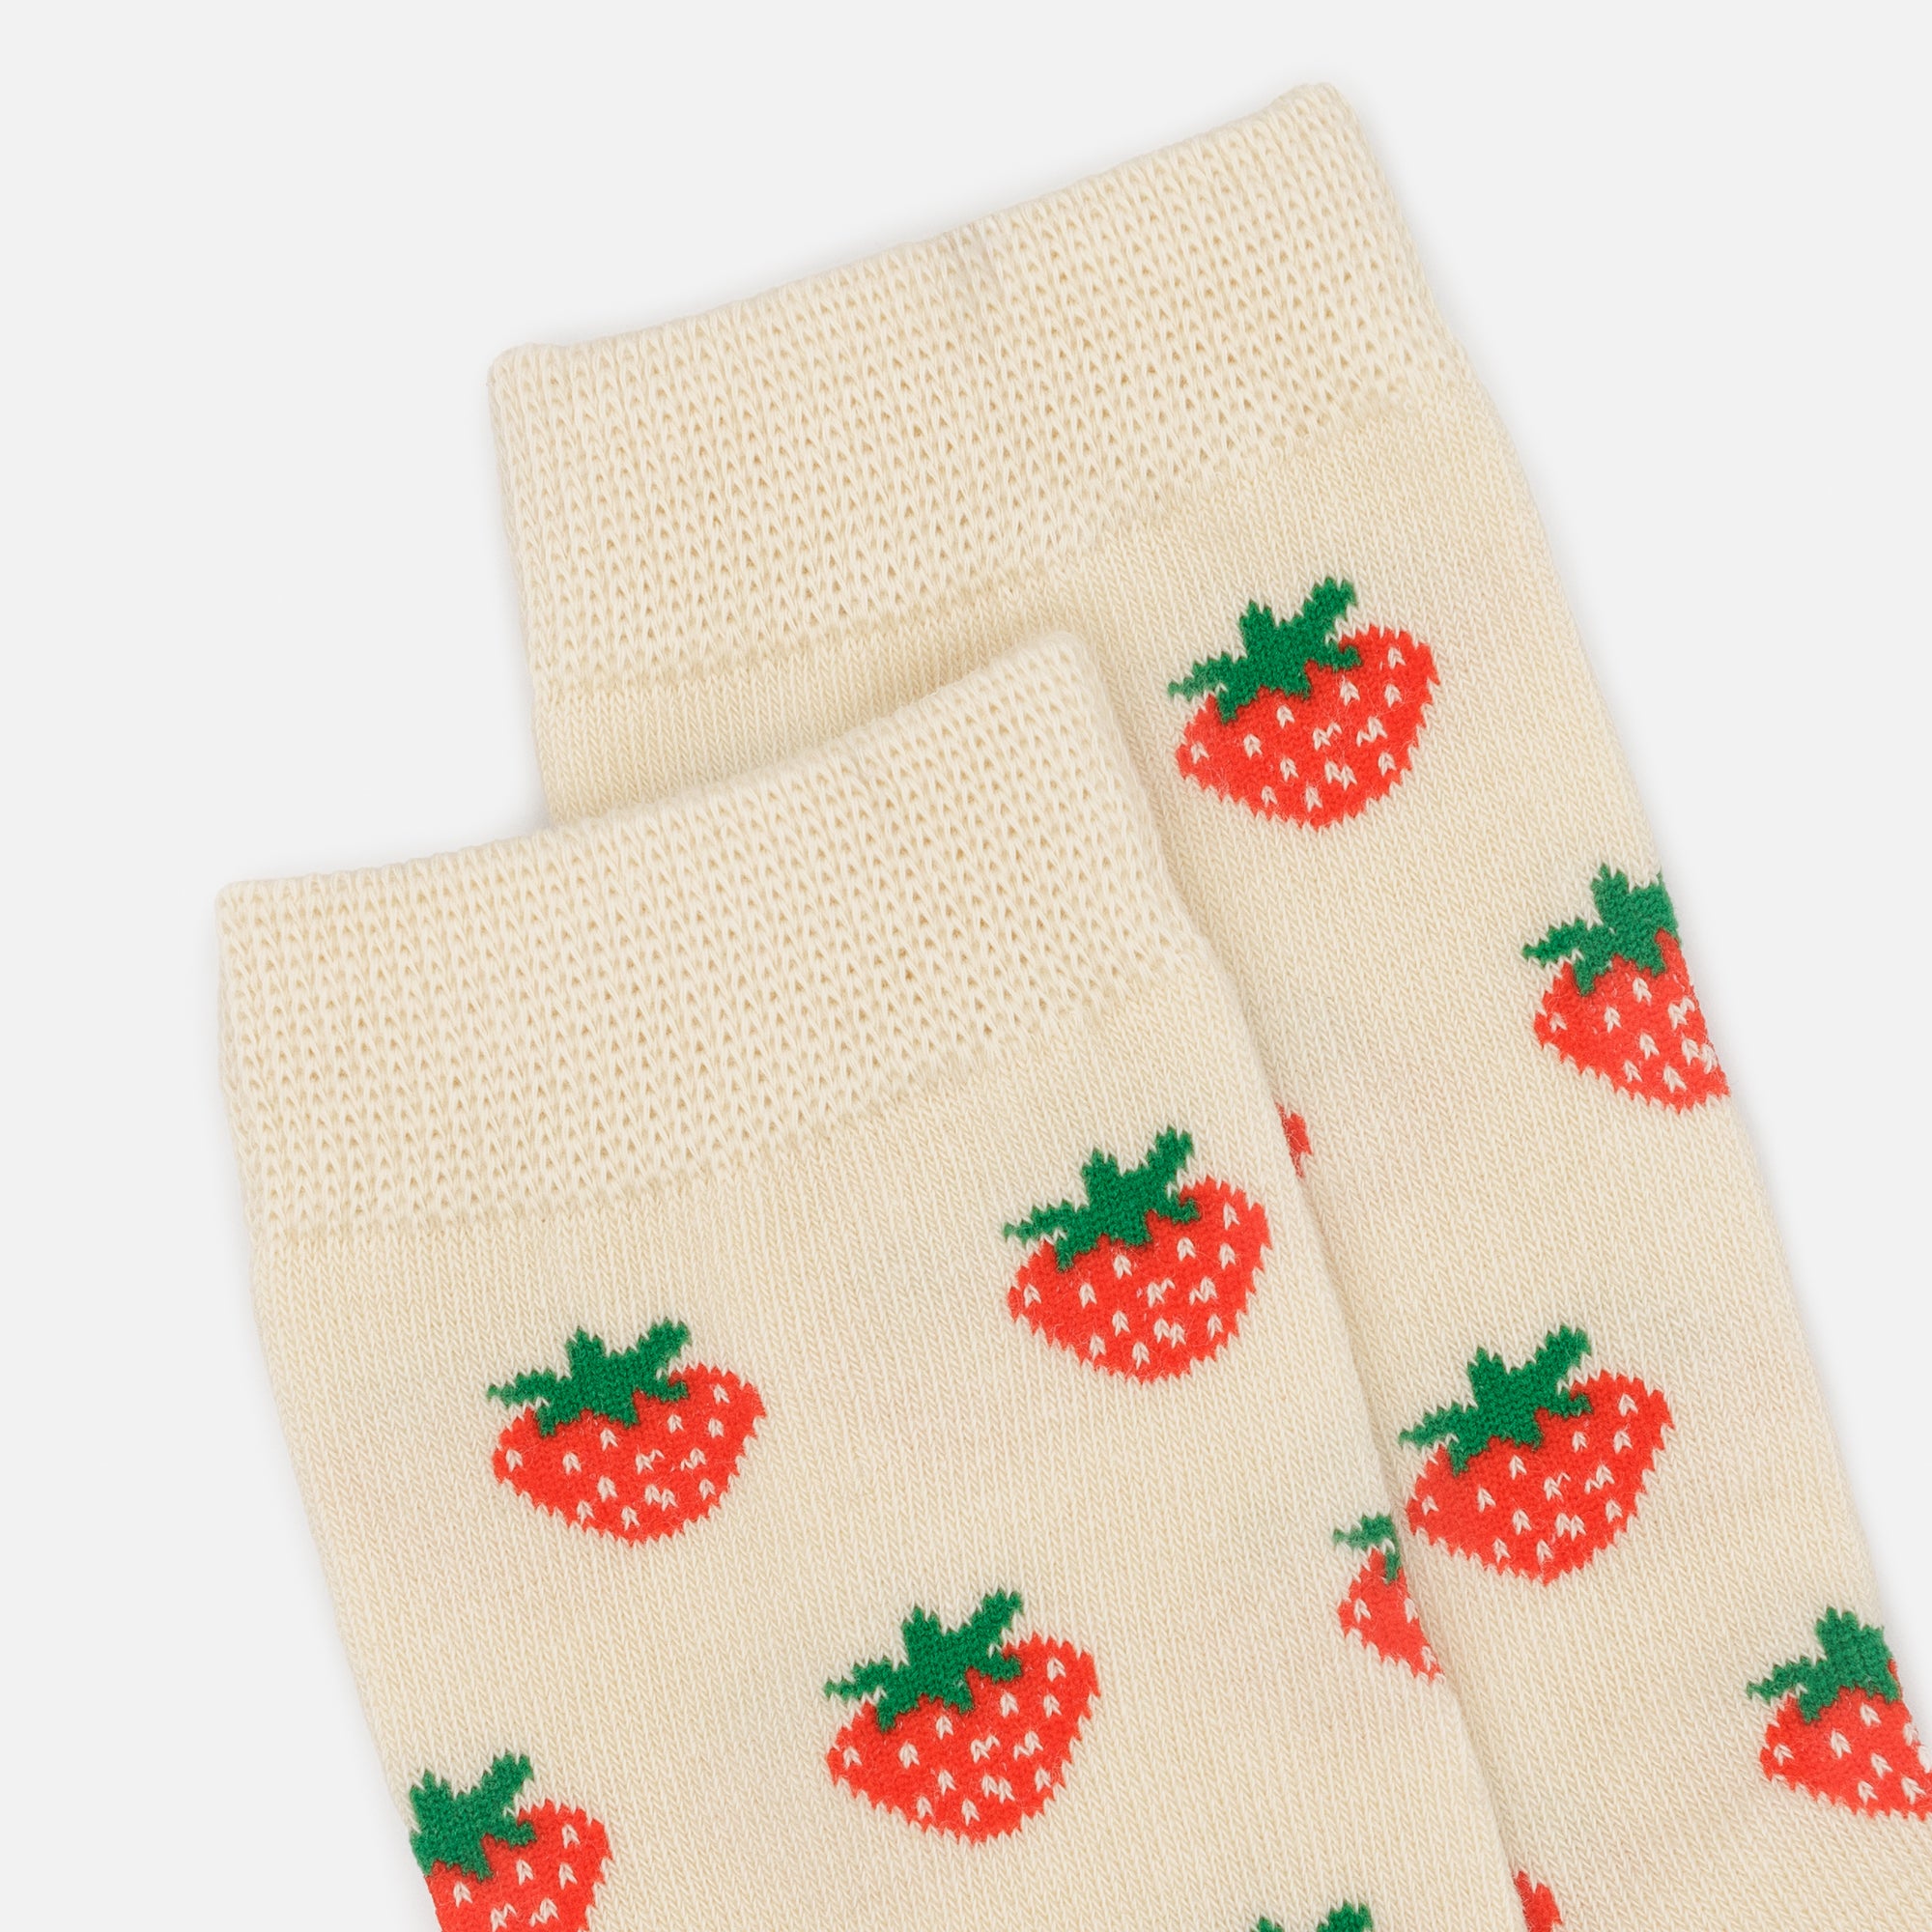 Cream stockings with small strawberries